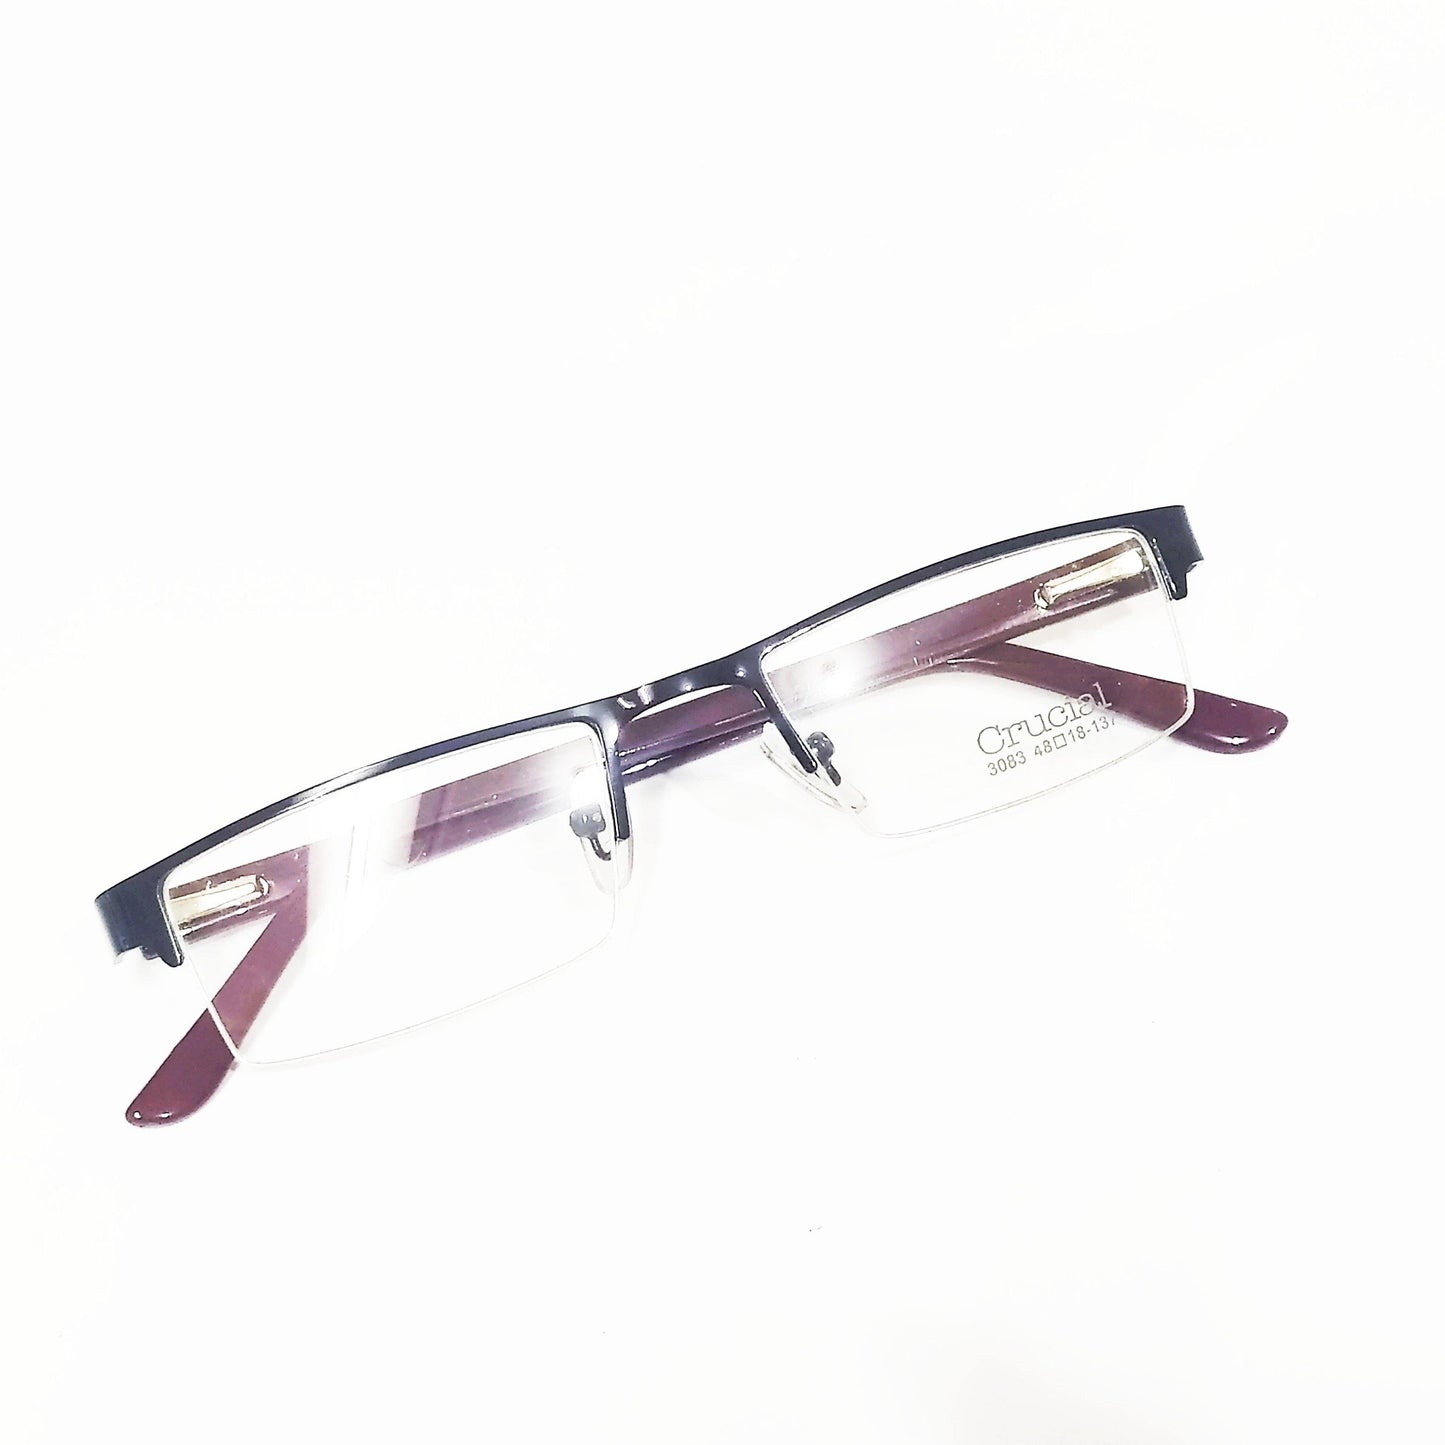 Buy Black Front Brown Side Metal Supra Spectacle Frame Glasses For Women and Men - Glasses India Online in India